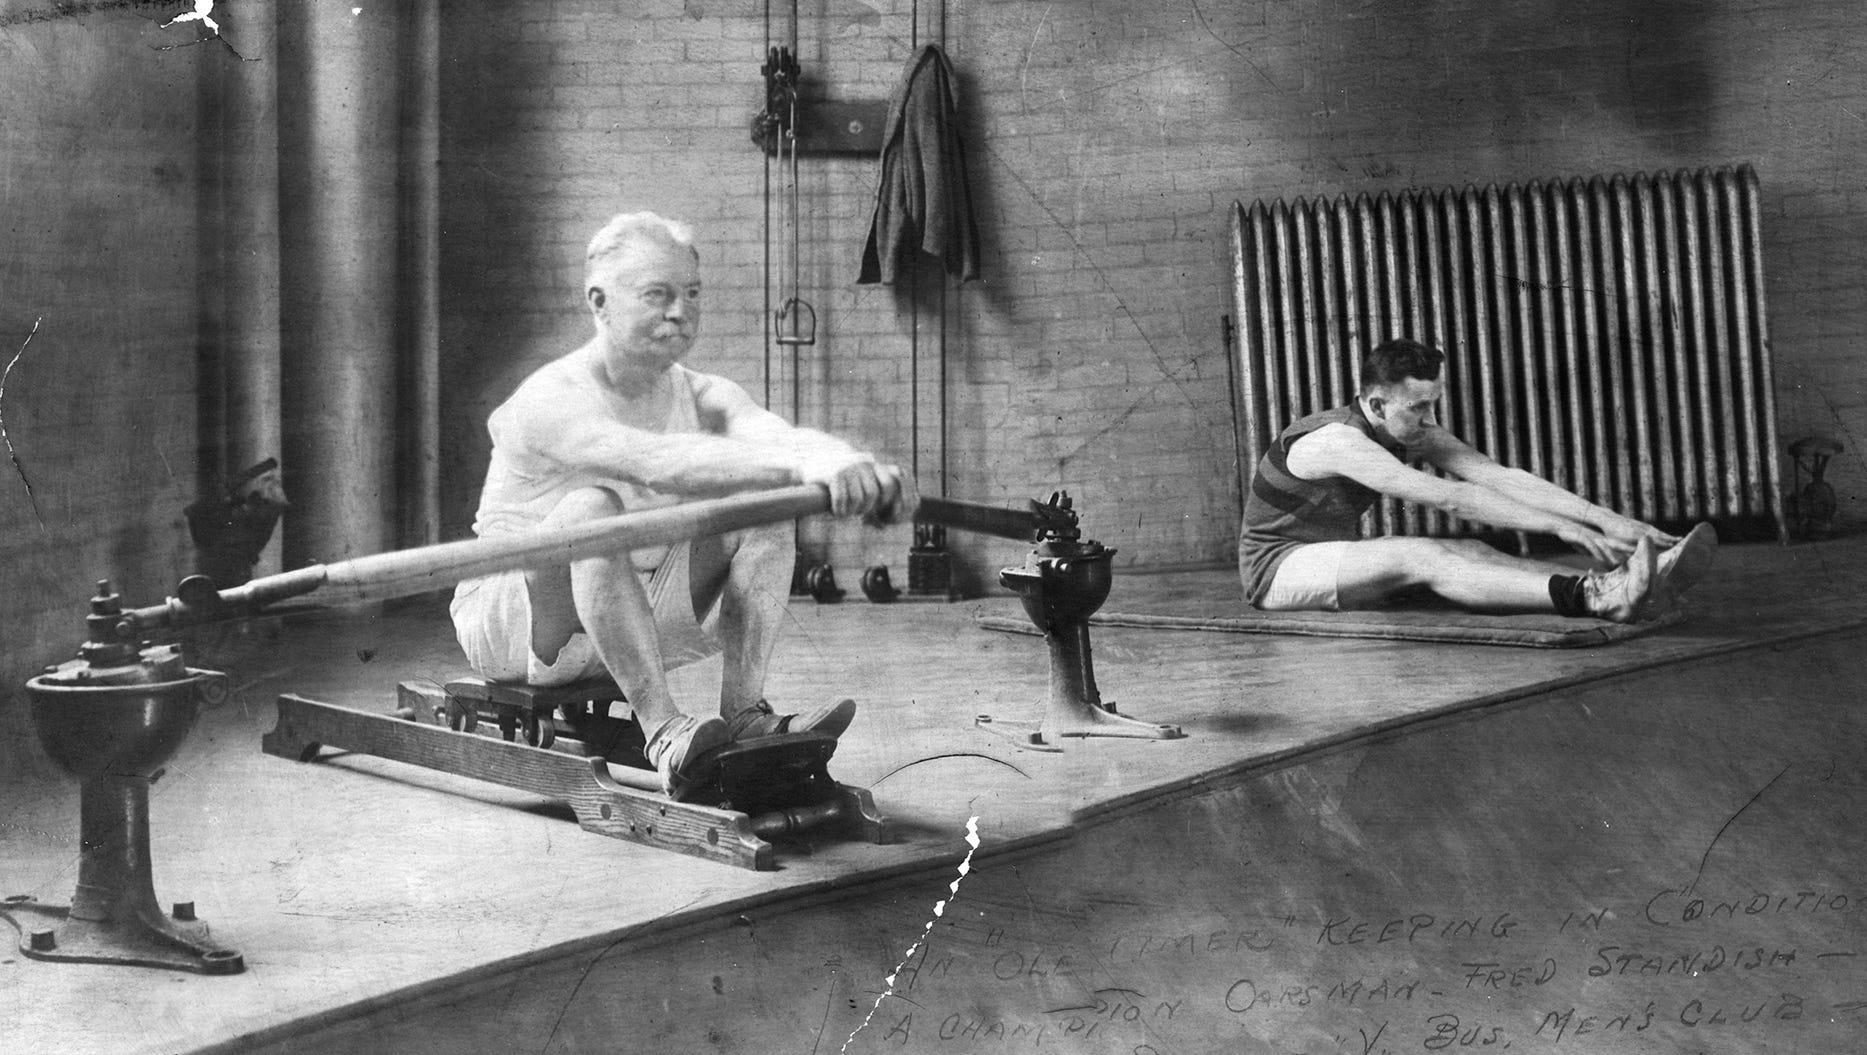 An older man uses a rowing machine at Detroit's YMCA, while a younger man stretches. Handwritten on the photograph: "An 'ole timer' keeping in condition. A champion oarsman, Fred Standish, member Detroit Y. Both men were members of the Business Men's Club at the YMCA started by A.G. Studer."